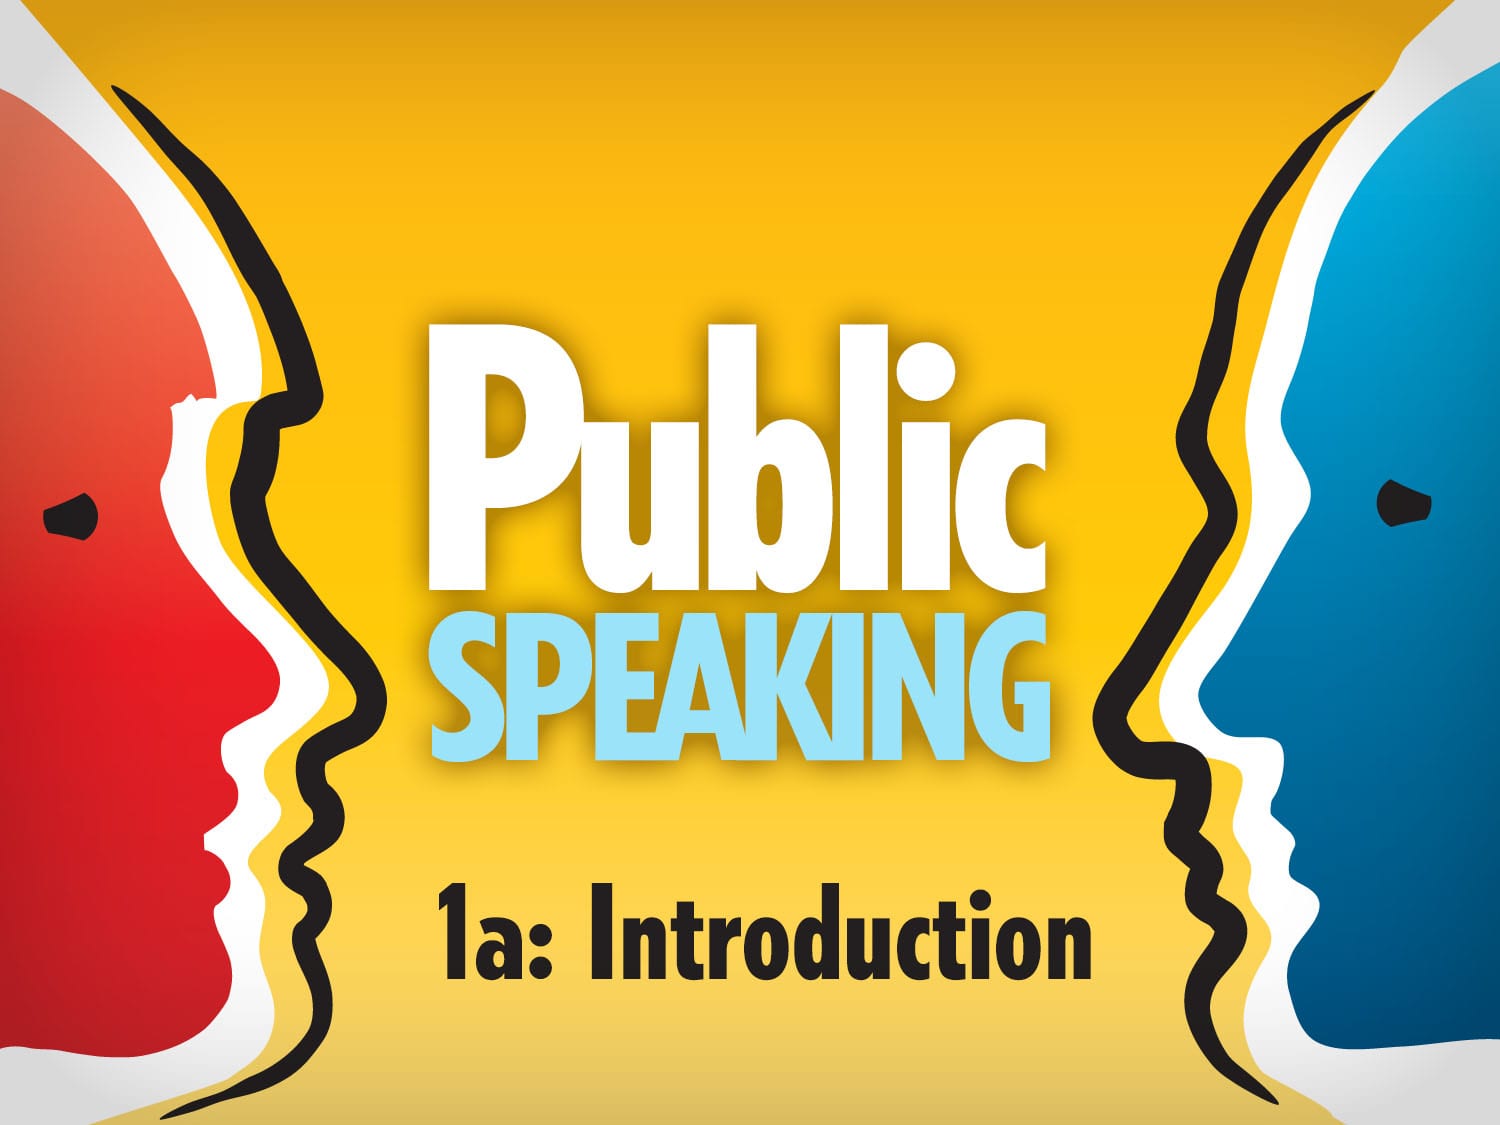 Public Speaking 1a: Introduction